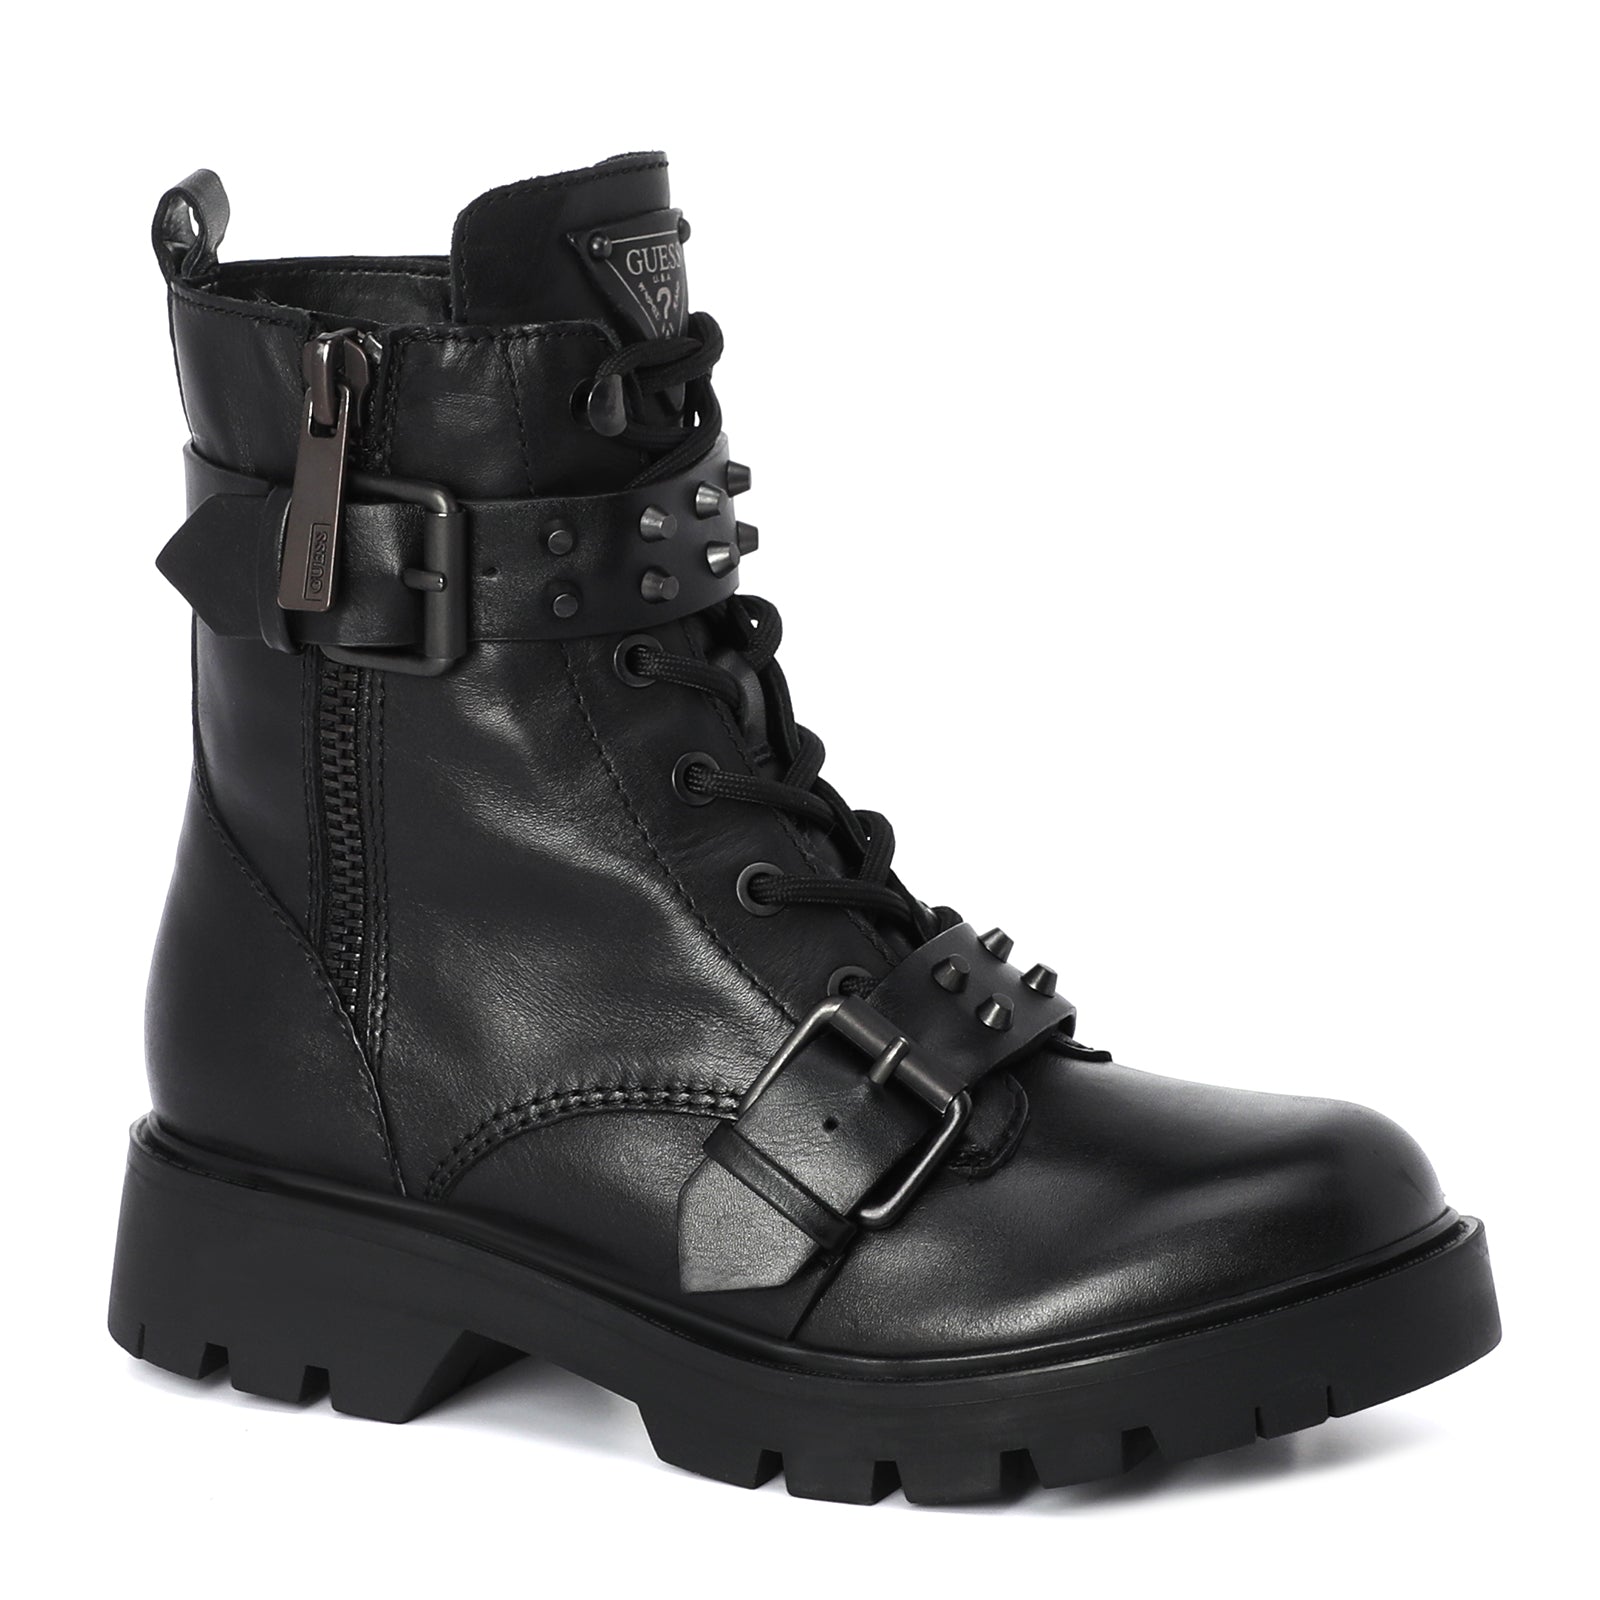 GUESS Black Studded Boot